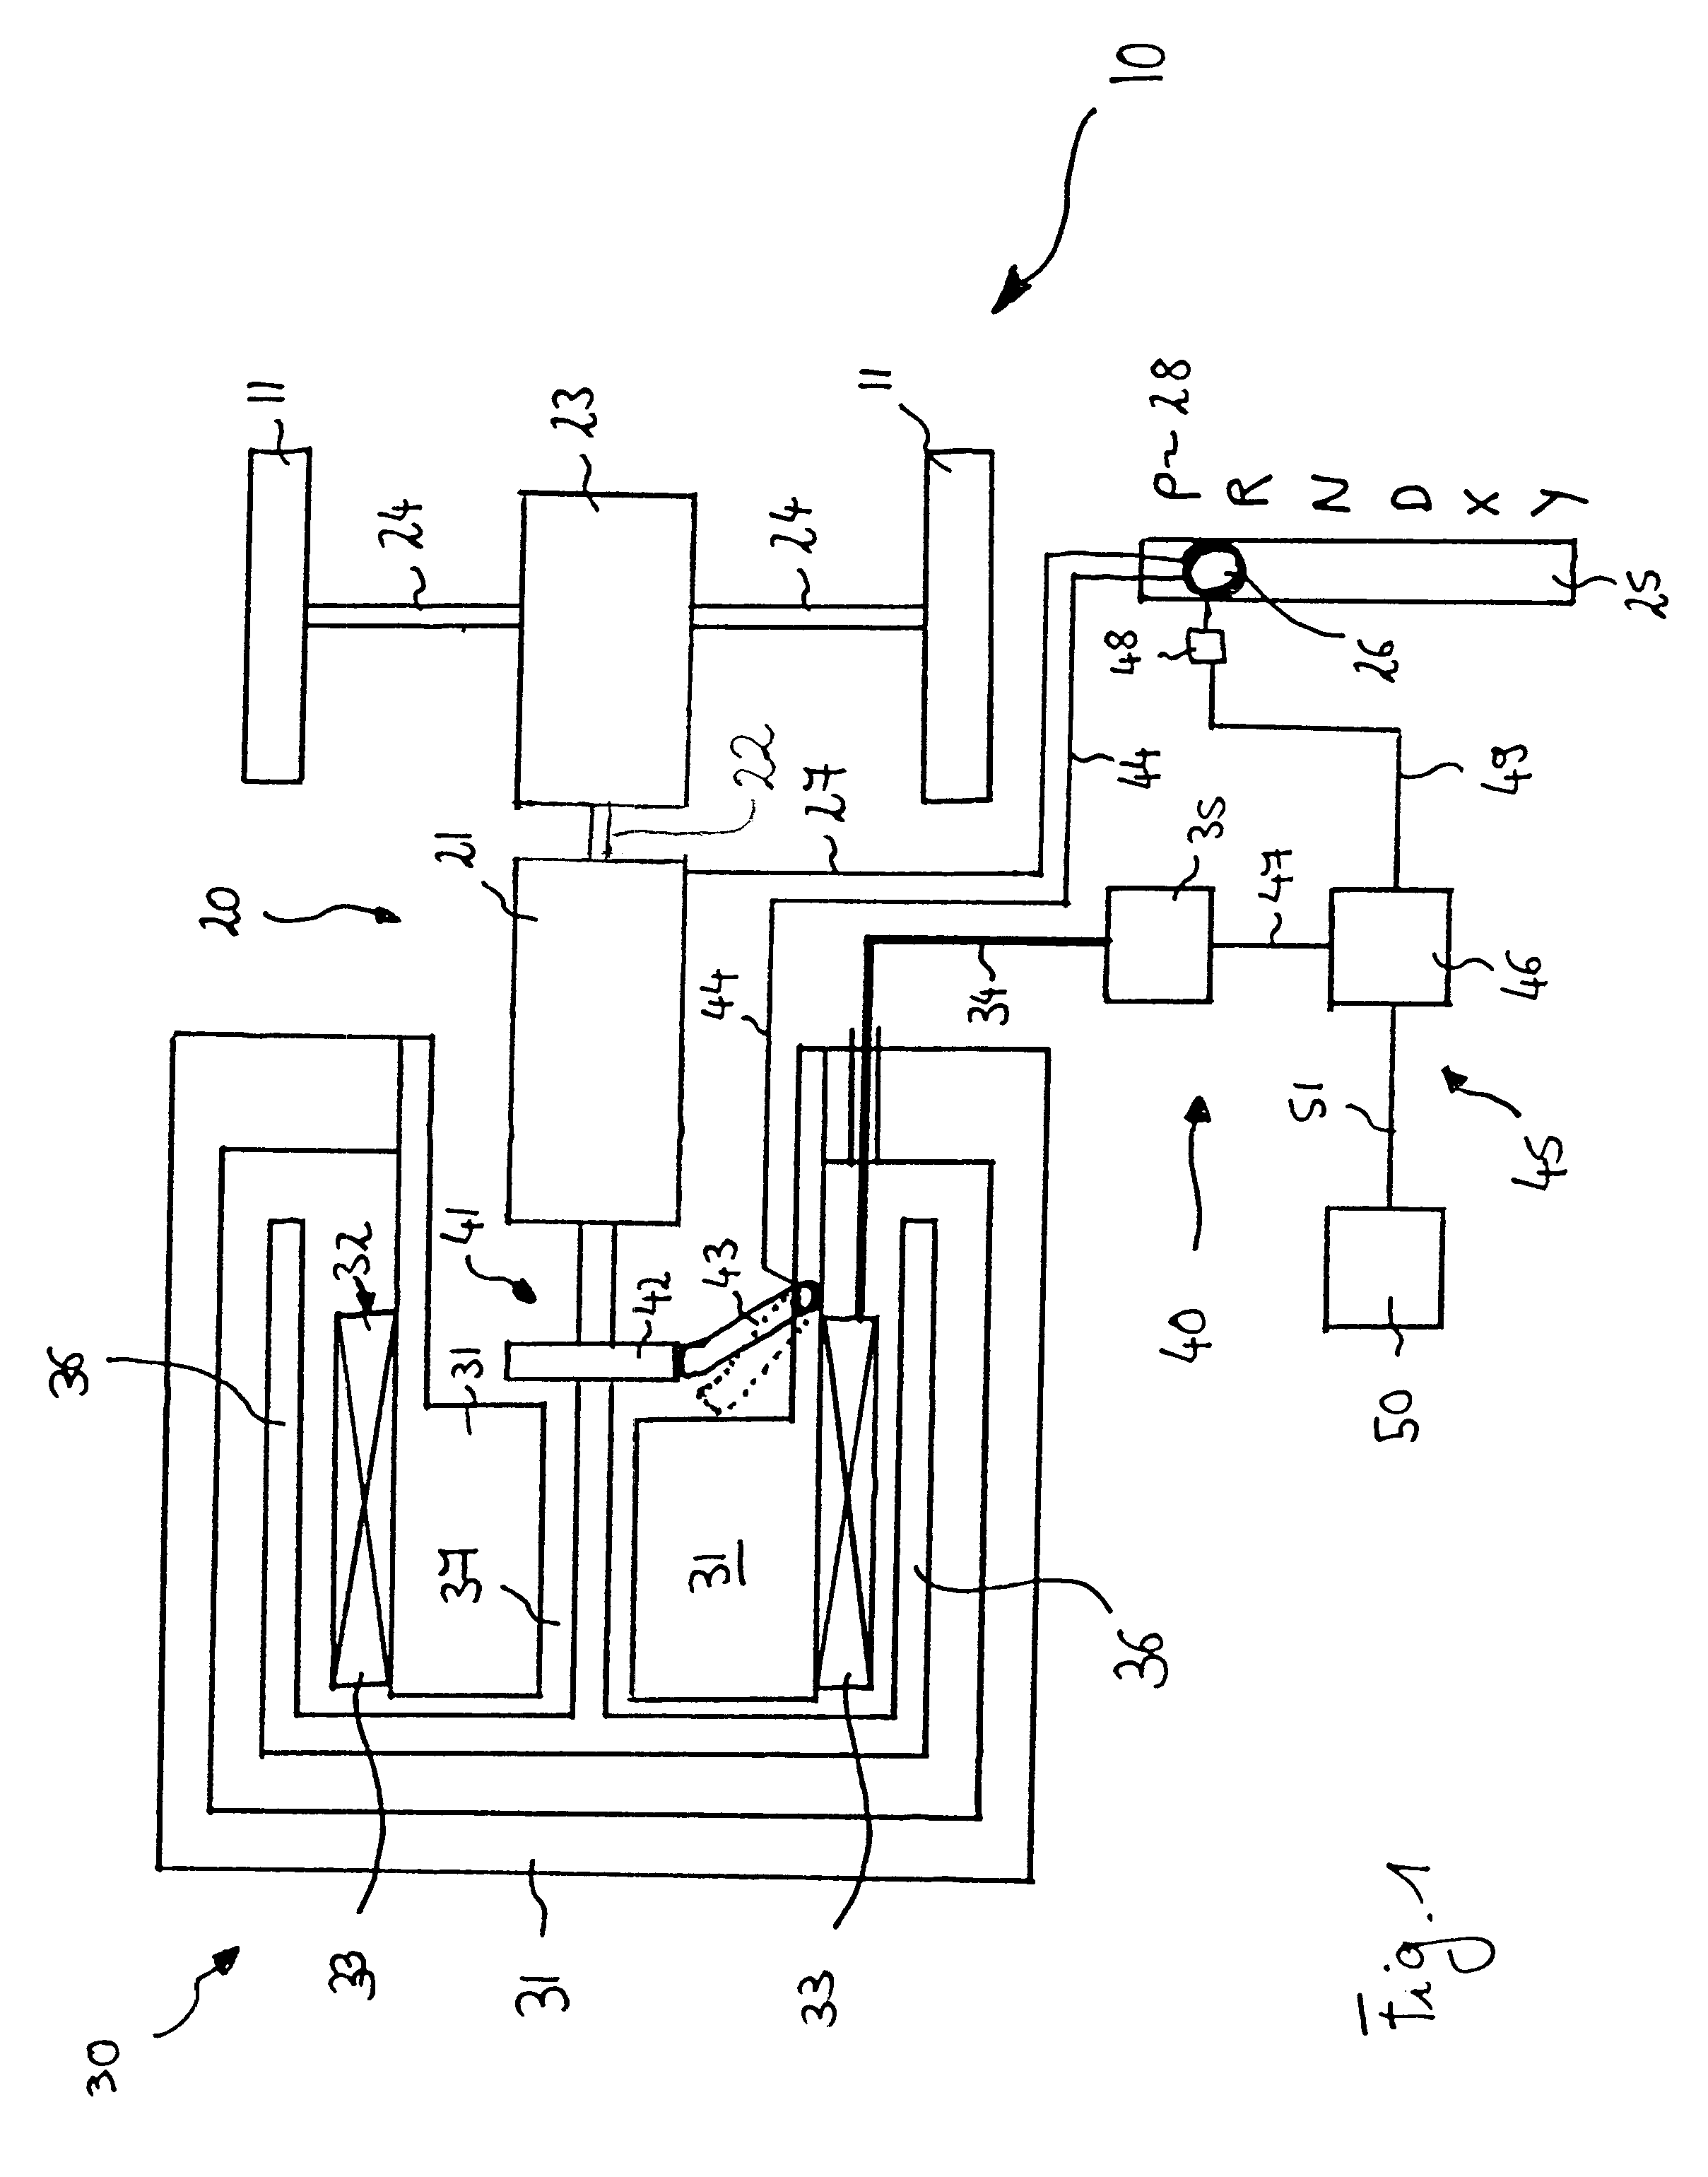 Parking lock for a vehicle having an electrical drive, and an electrical drive for a vehicle